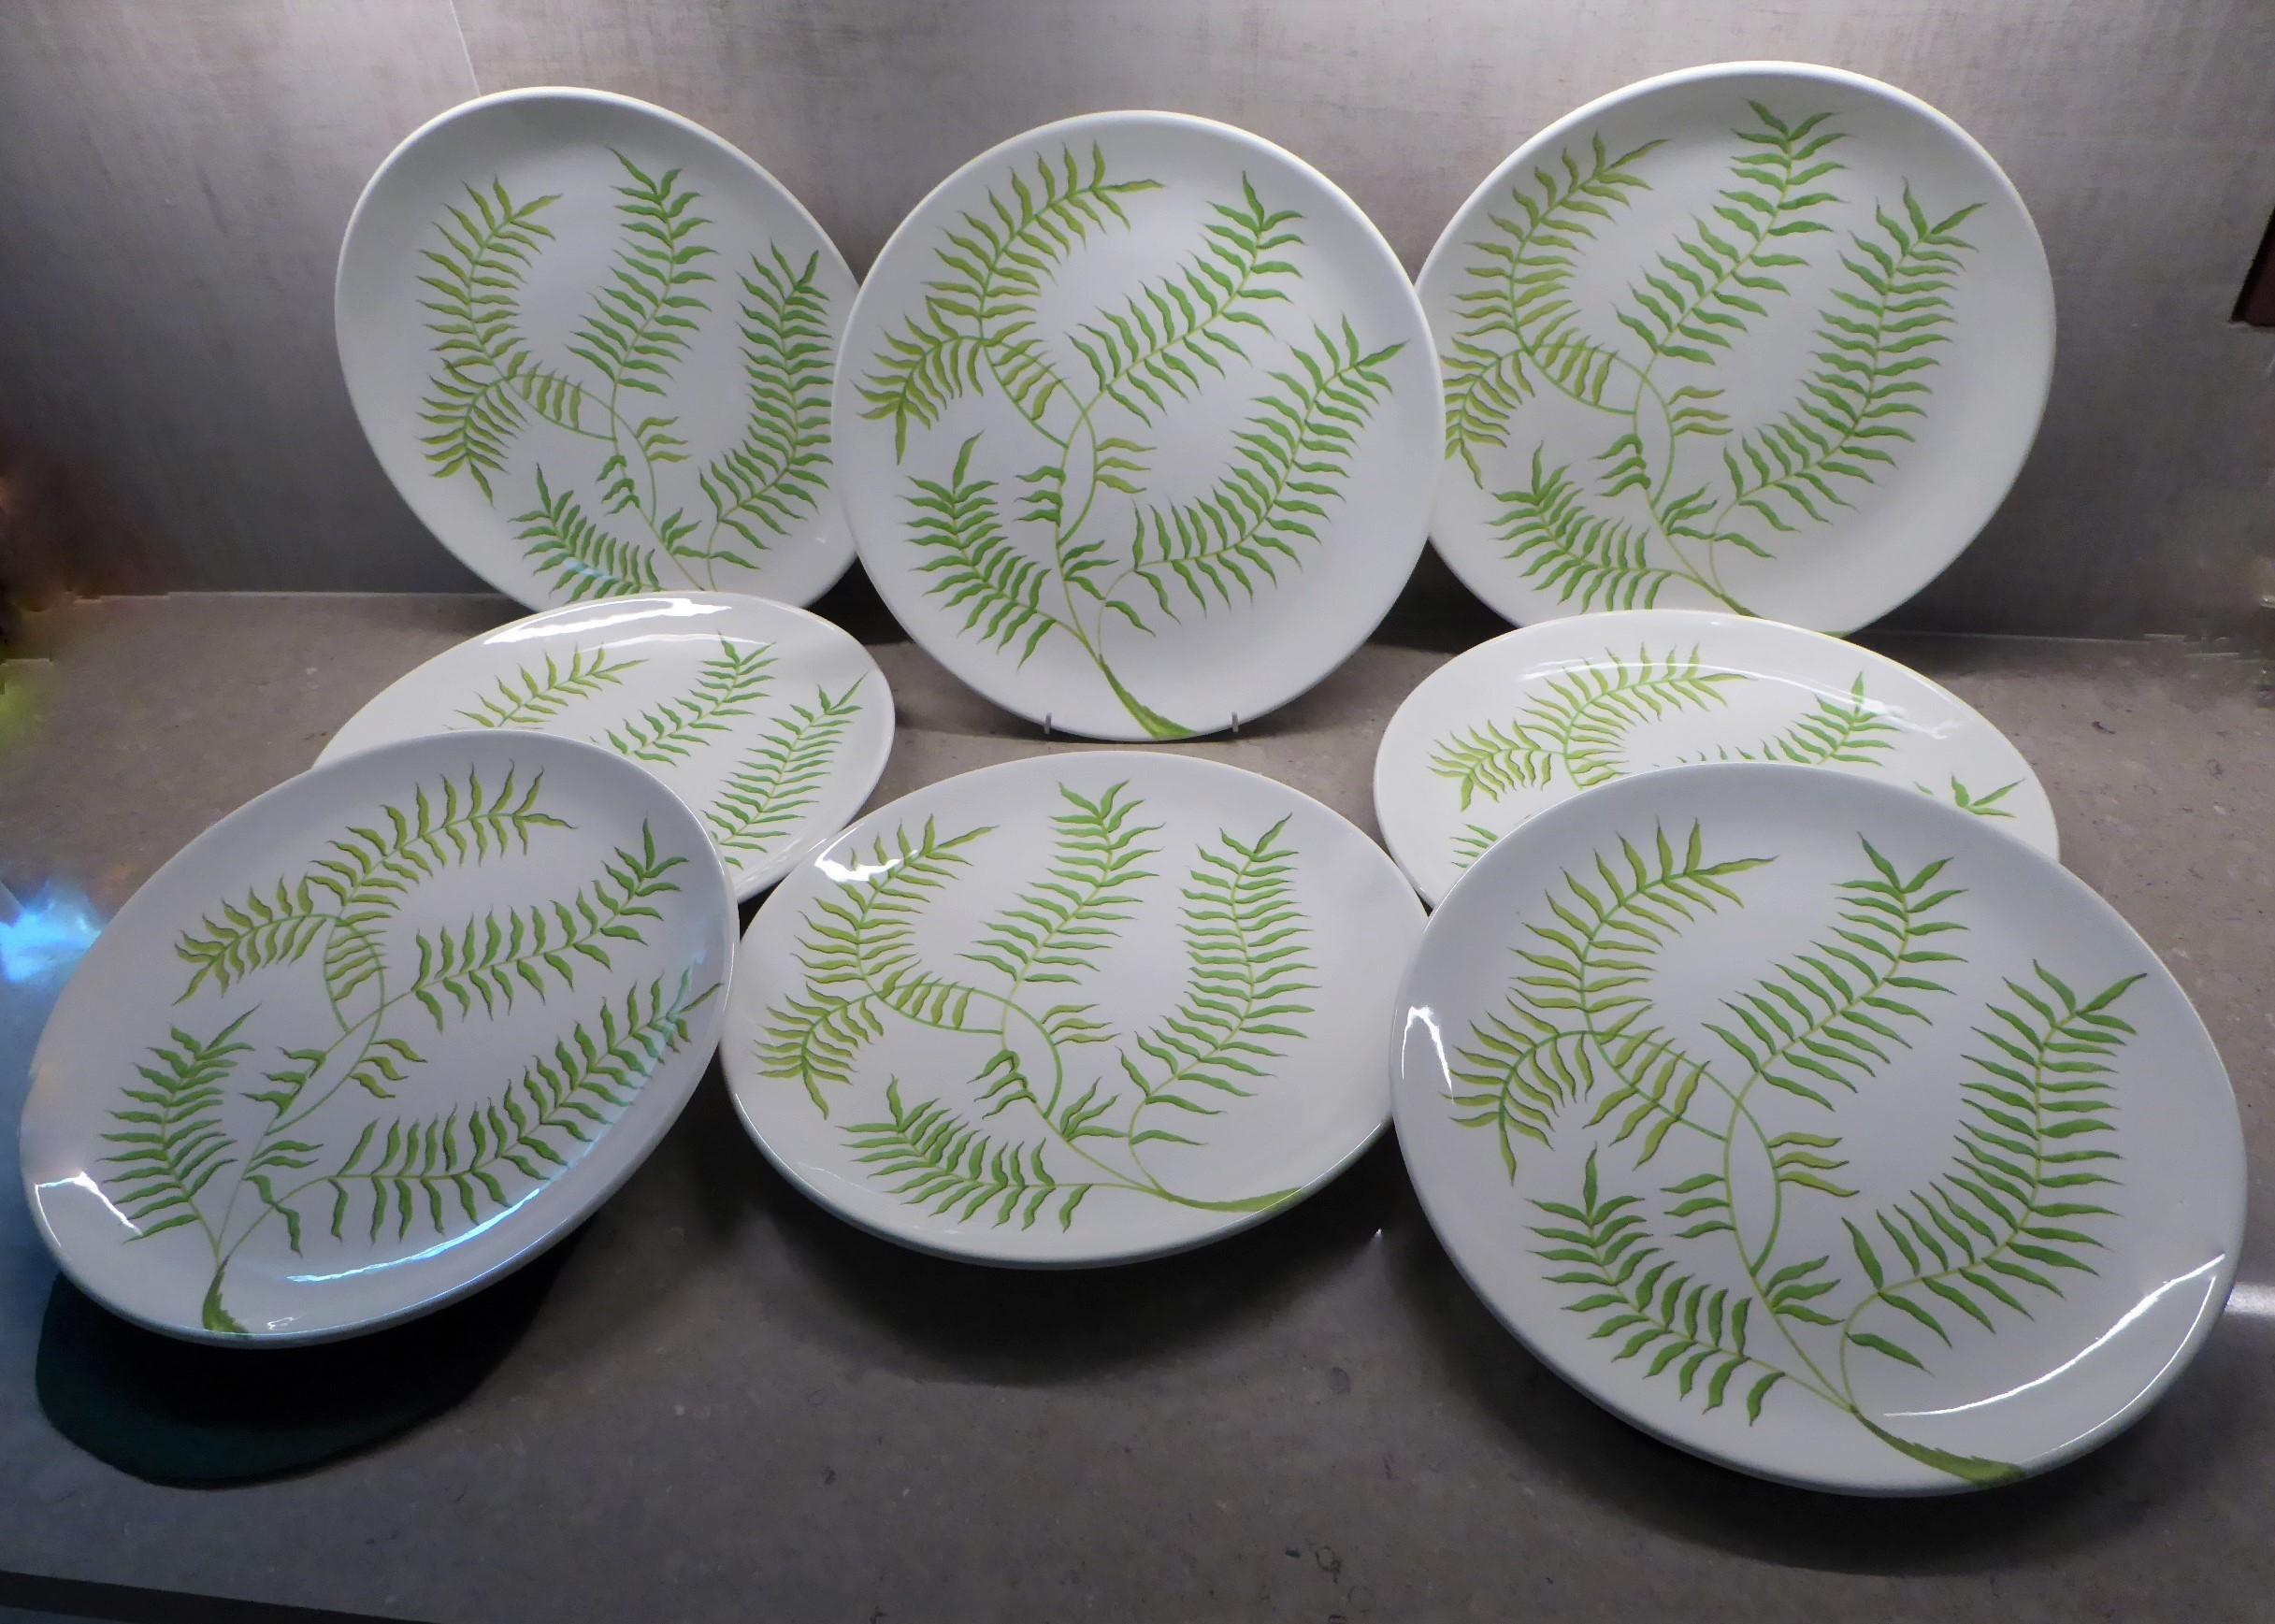 Eight bright and cheerful Mid-Century Modern large dinner or serving platters by Ceramiche Ernestine from Salerno in Northern Italy from the 1960s. Ernestine designed all patterns and shapes for her company, this simple Fern pattern of these